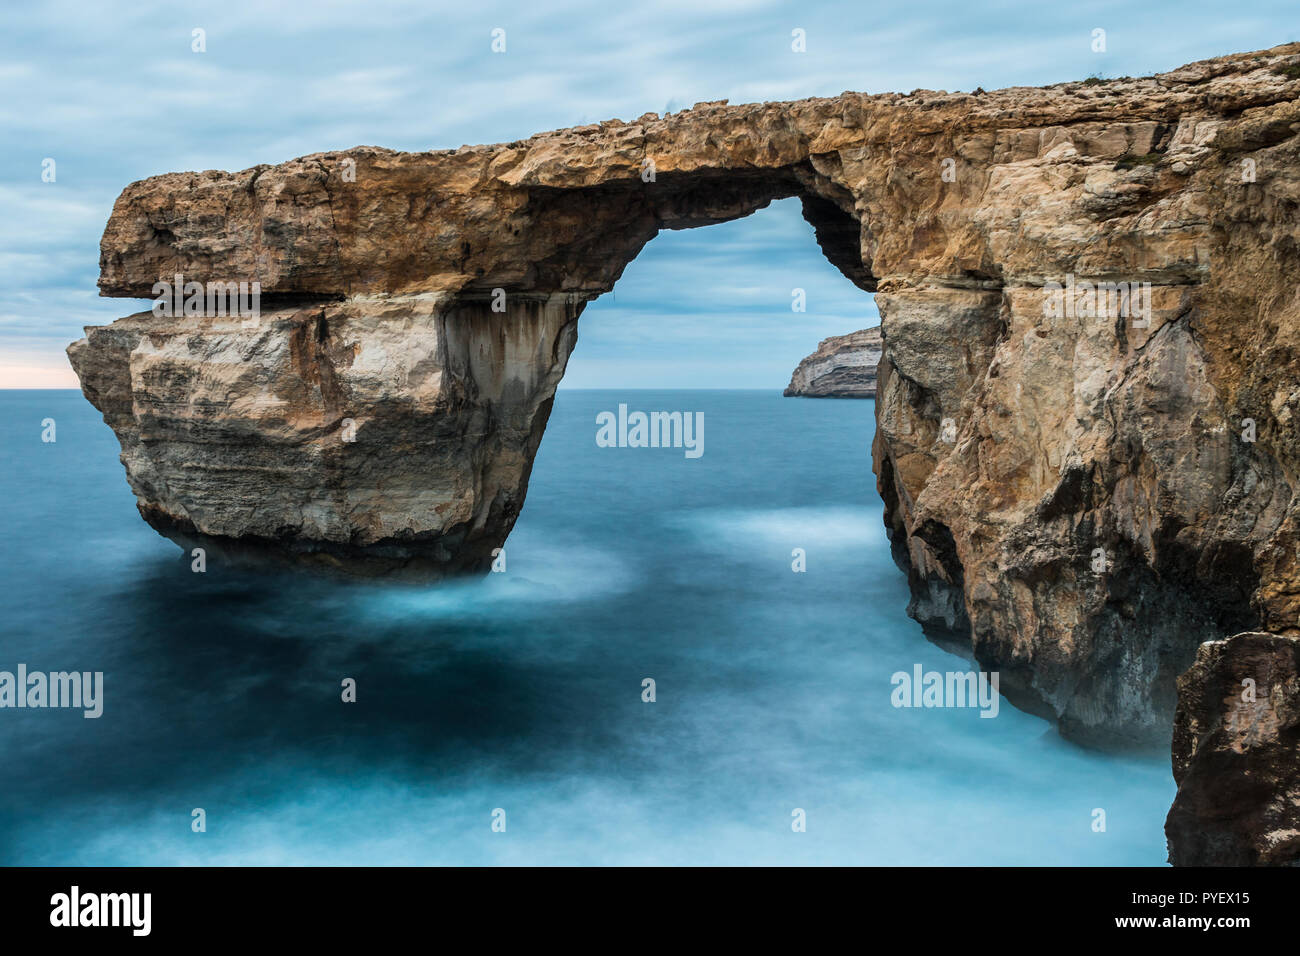 Seascapes of Dwejra Gozo Azur window, blue hole and inland sea Malta during winter with long exposure Stock Photo